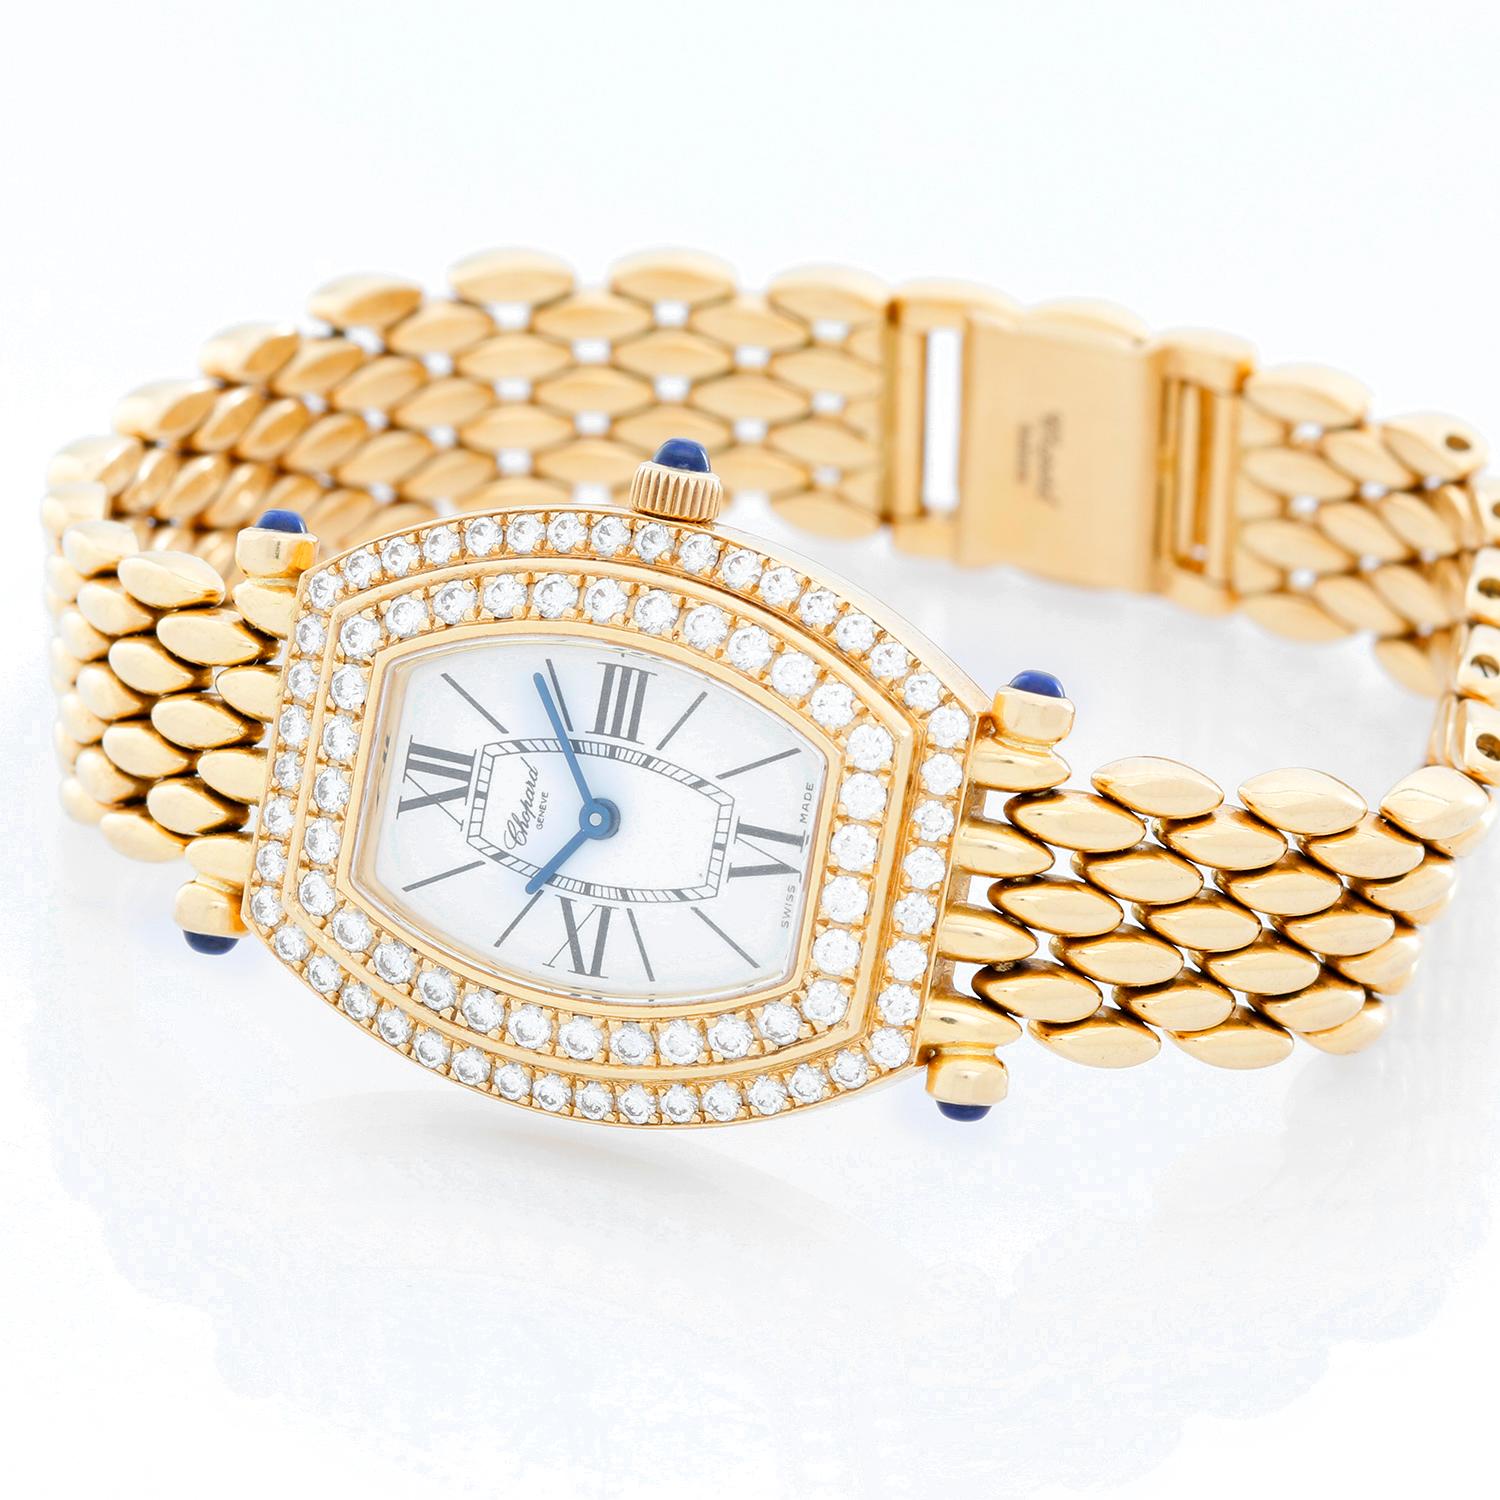 Chopard 18K Yellow Gold Diamond Ladies Watch 551 1 - Quartz. 18K Yellow gold with double row diamonds ( 23 x 35 mm ). White dial with Black Roman numerals and stick hour markers. 18K Yellow gold bracelet. Pre-owned with Chopard box and papers. Total